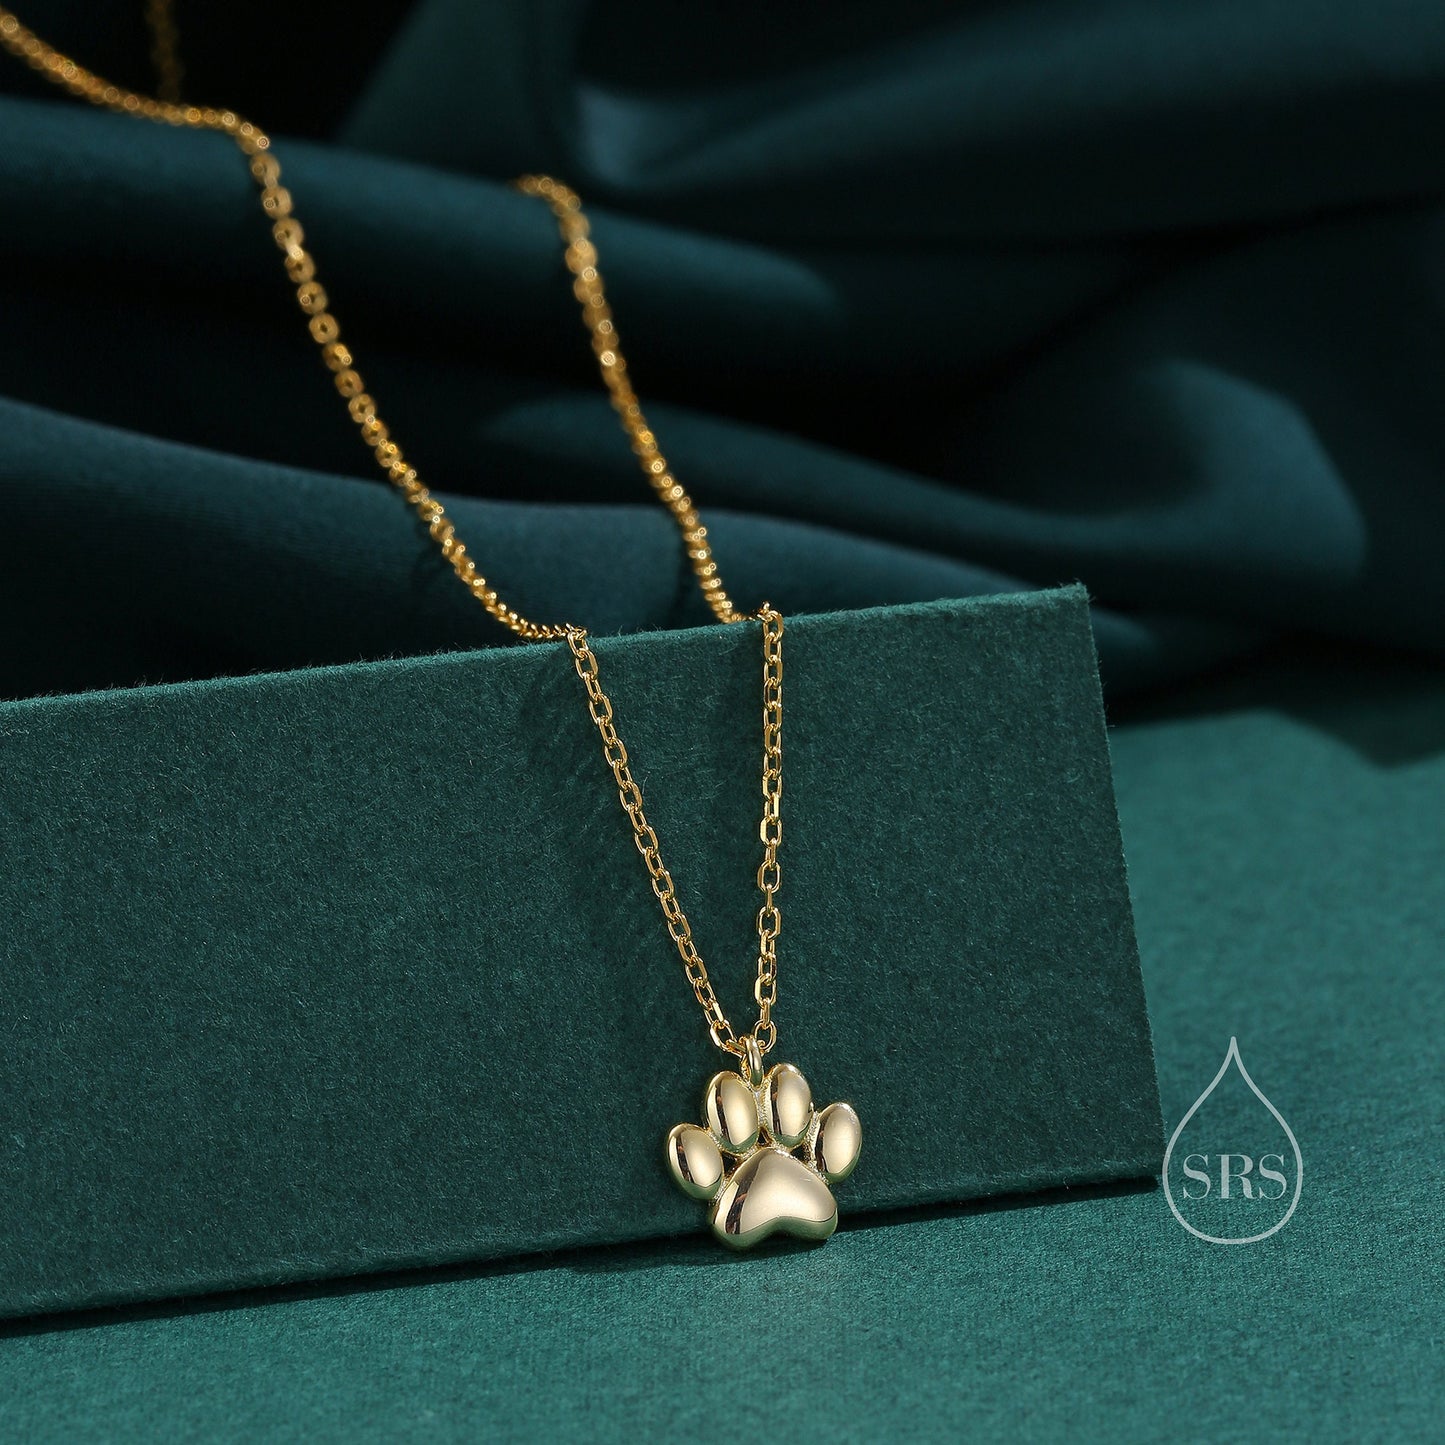 Paw Print Pendant Necklace in Sterling Silver, Silver or Gold, Delicate Paw Pendant Necklace, Cat Necklace, Dog Necklace, Pet Necklace